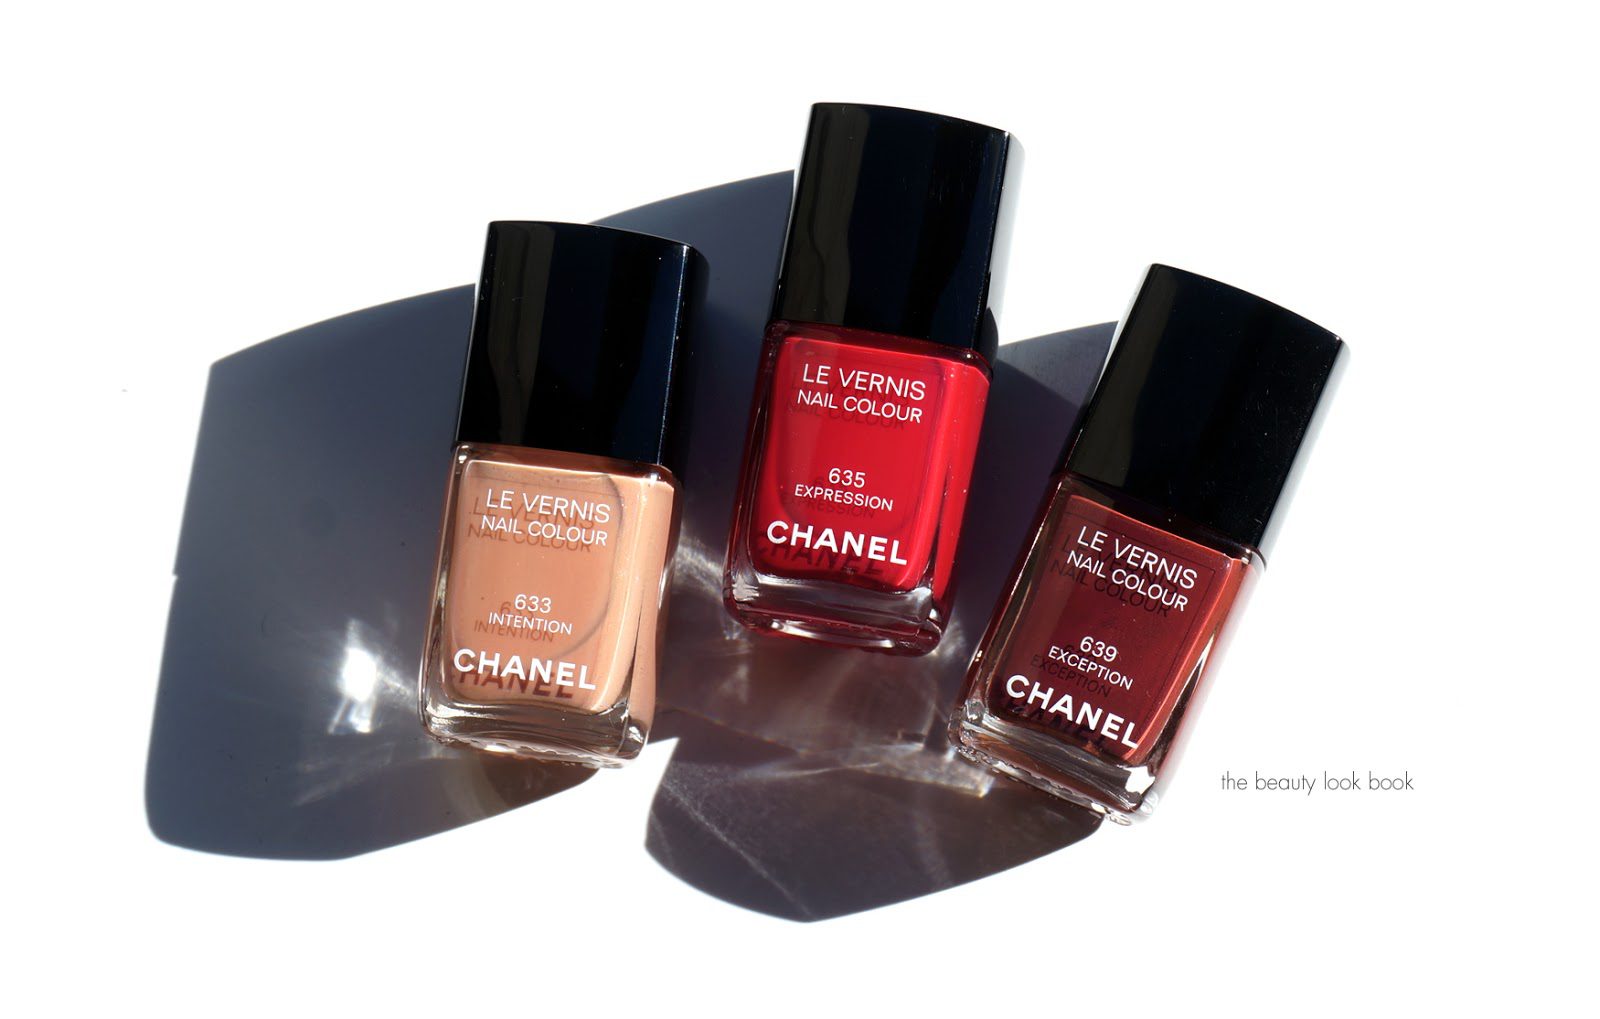 Chanel Le Vernis Nail Colour in Intention 633, Expression 635 and Exception  639 - The Beauty Look Book